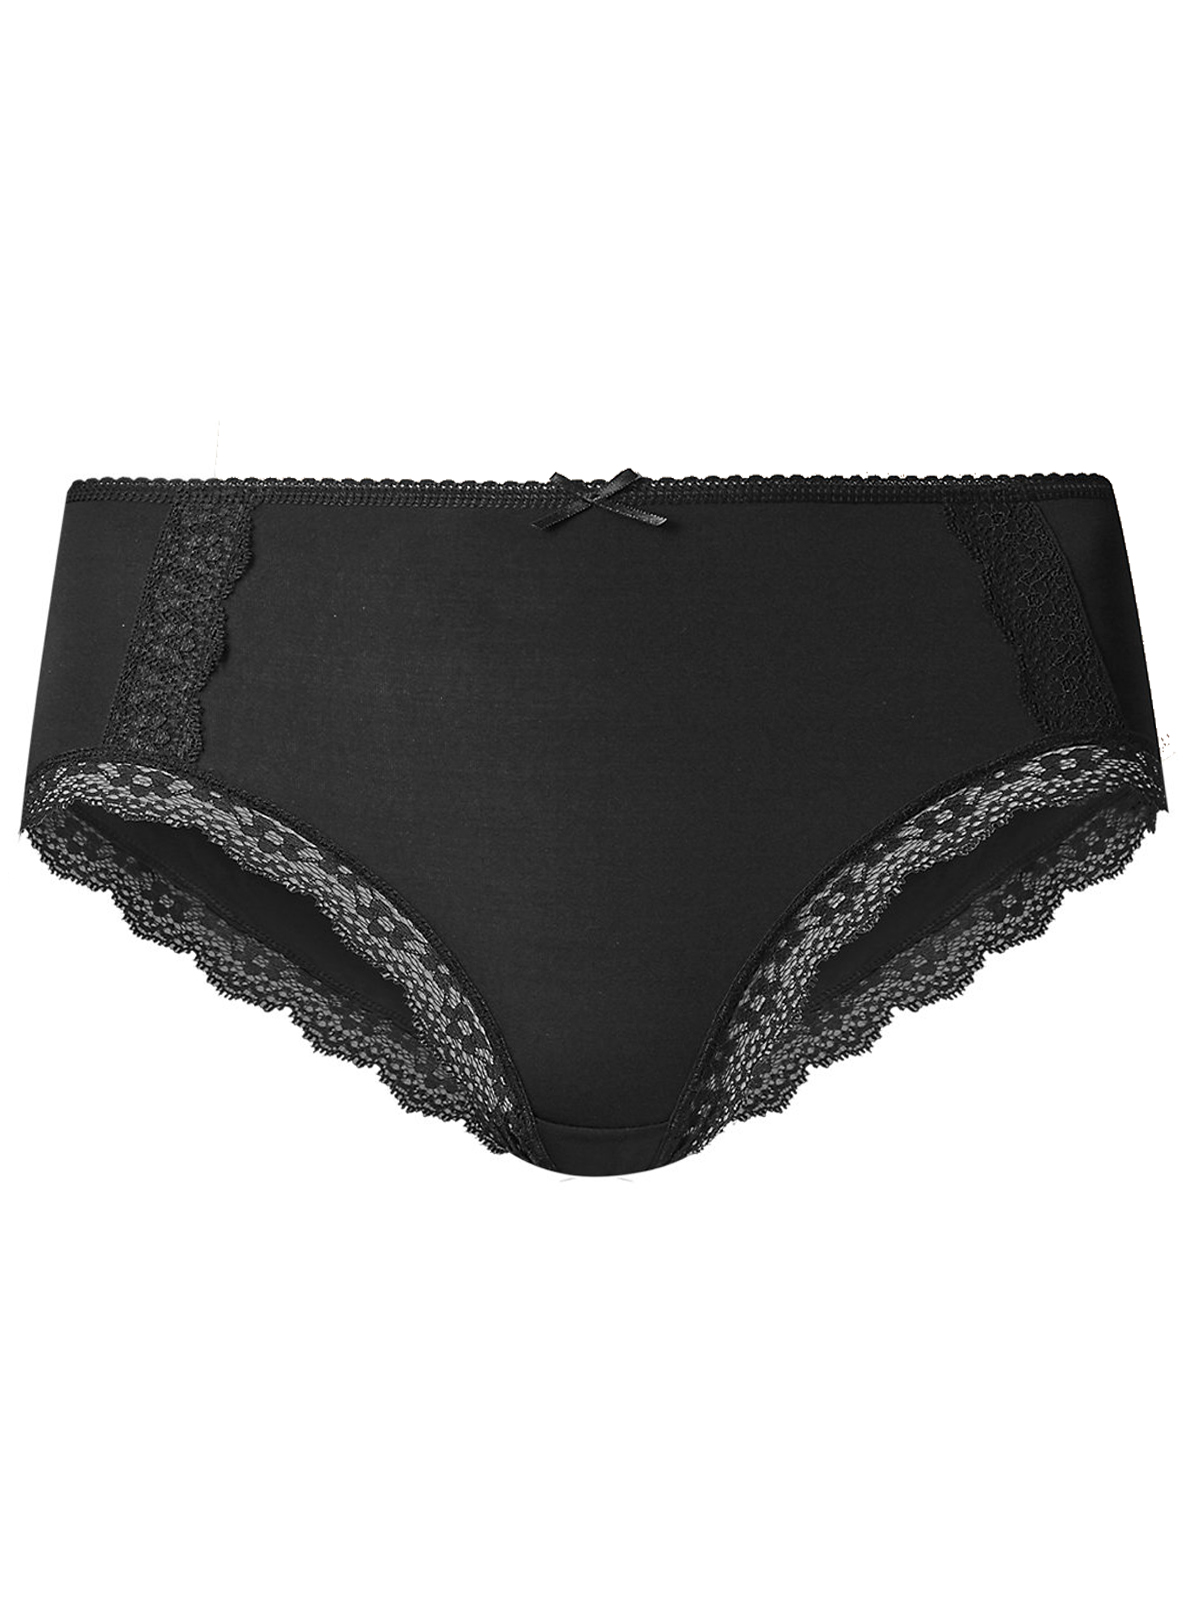 Marks and Spencer - - M&5 BLACK Lace Trim Midi Knickers - Size 12 to 16